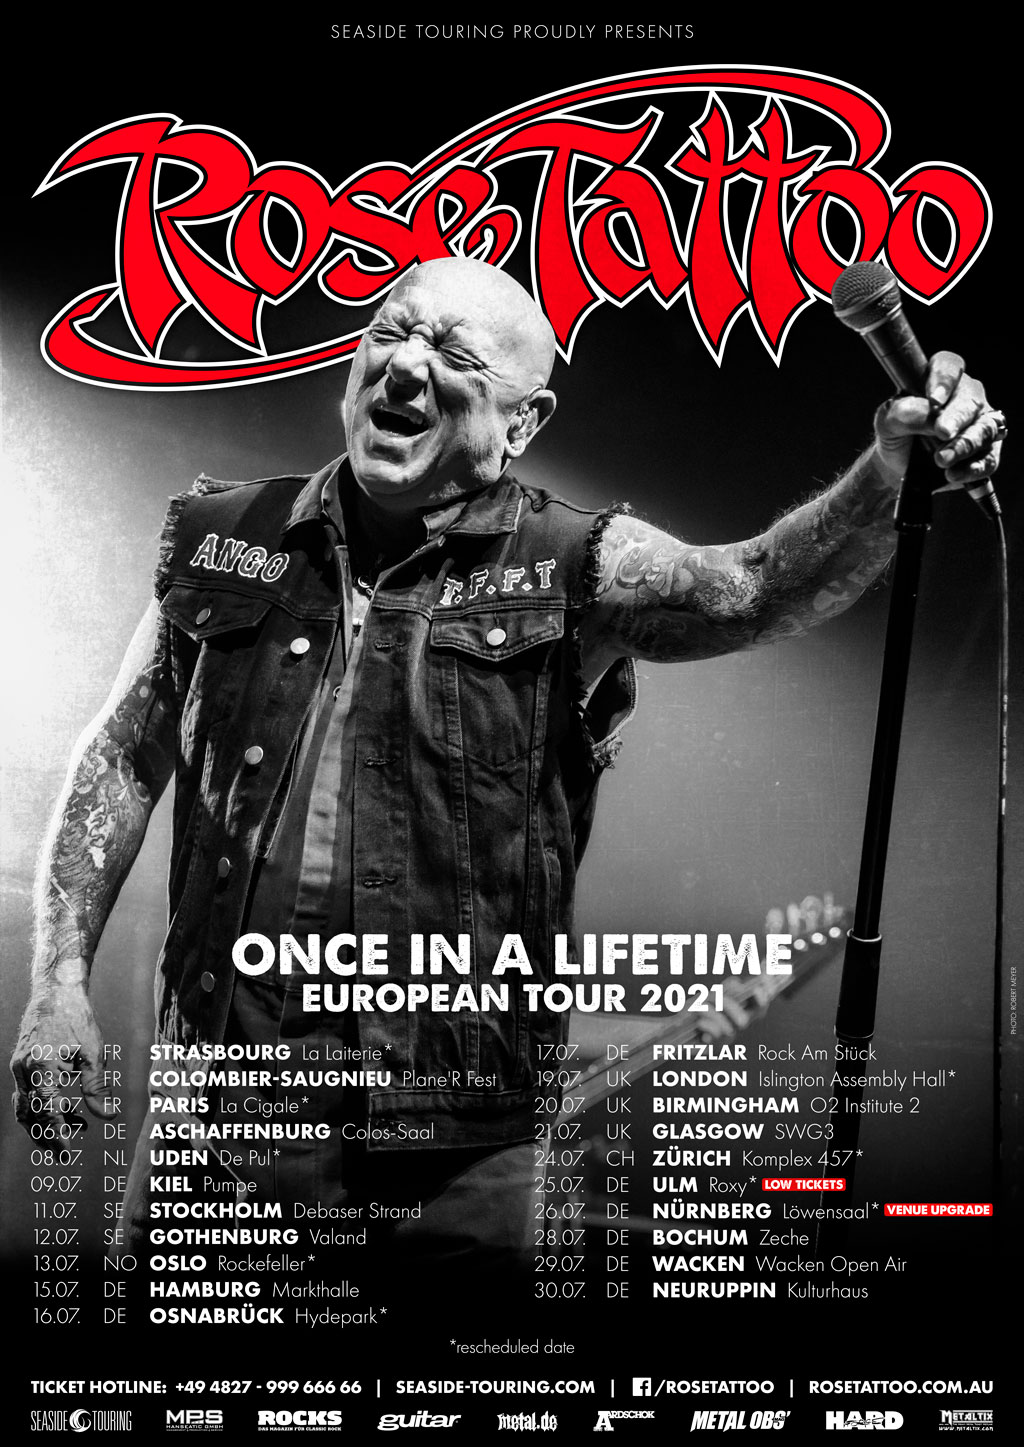 Rose Tattoo - Once in a lifetime European Tour 2021